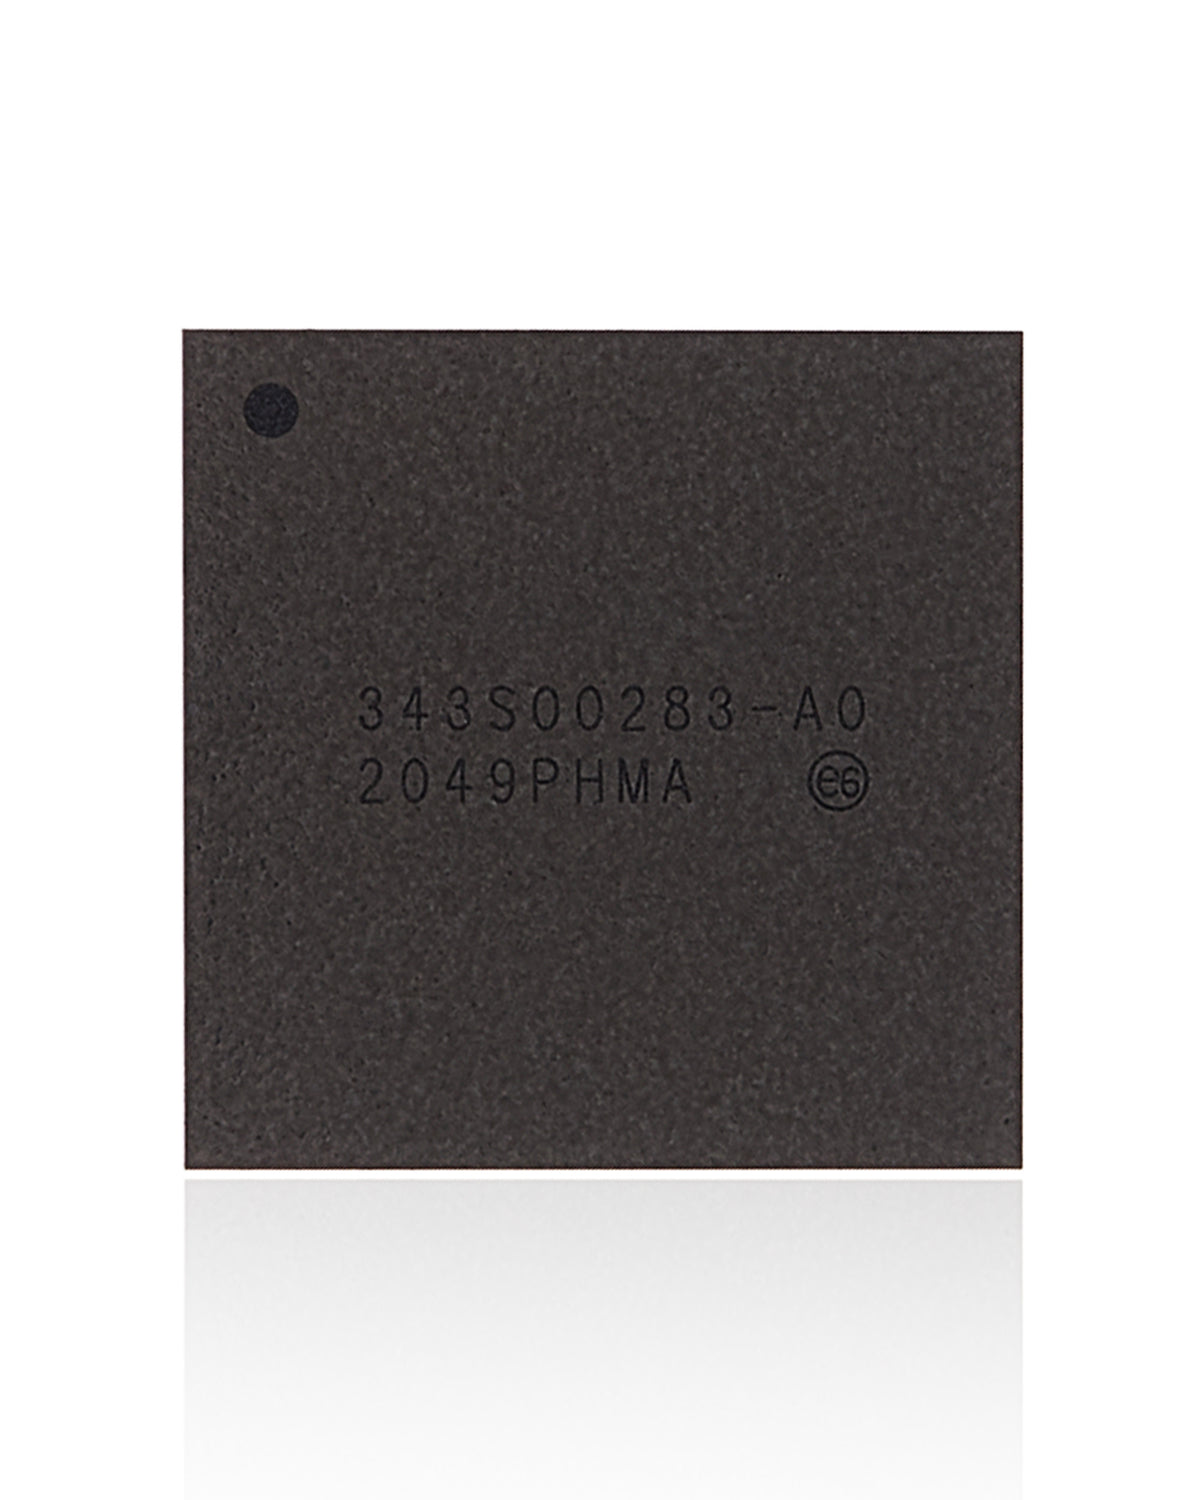 POWER MANAGEMENT PMIC IC COMPATIBLE WITH IPAD 8 (2020) (343S00283)